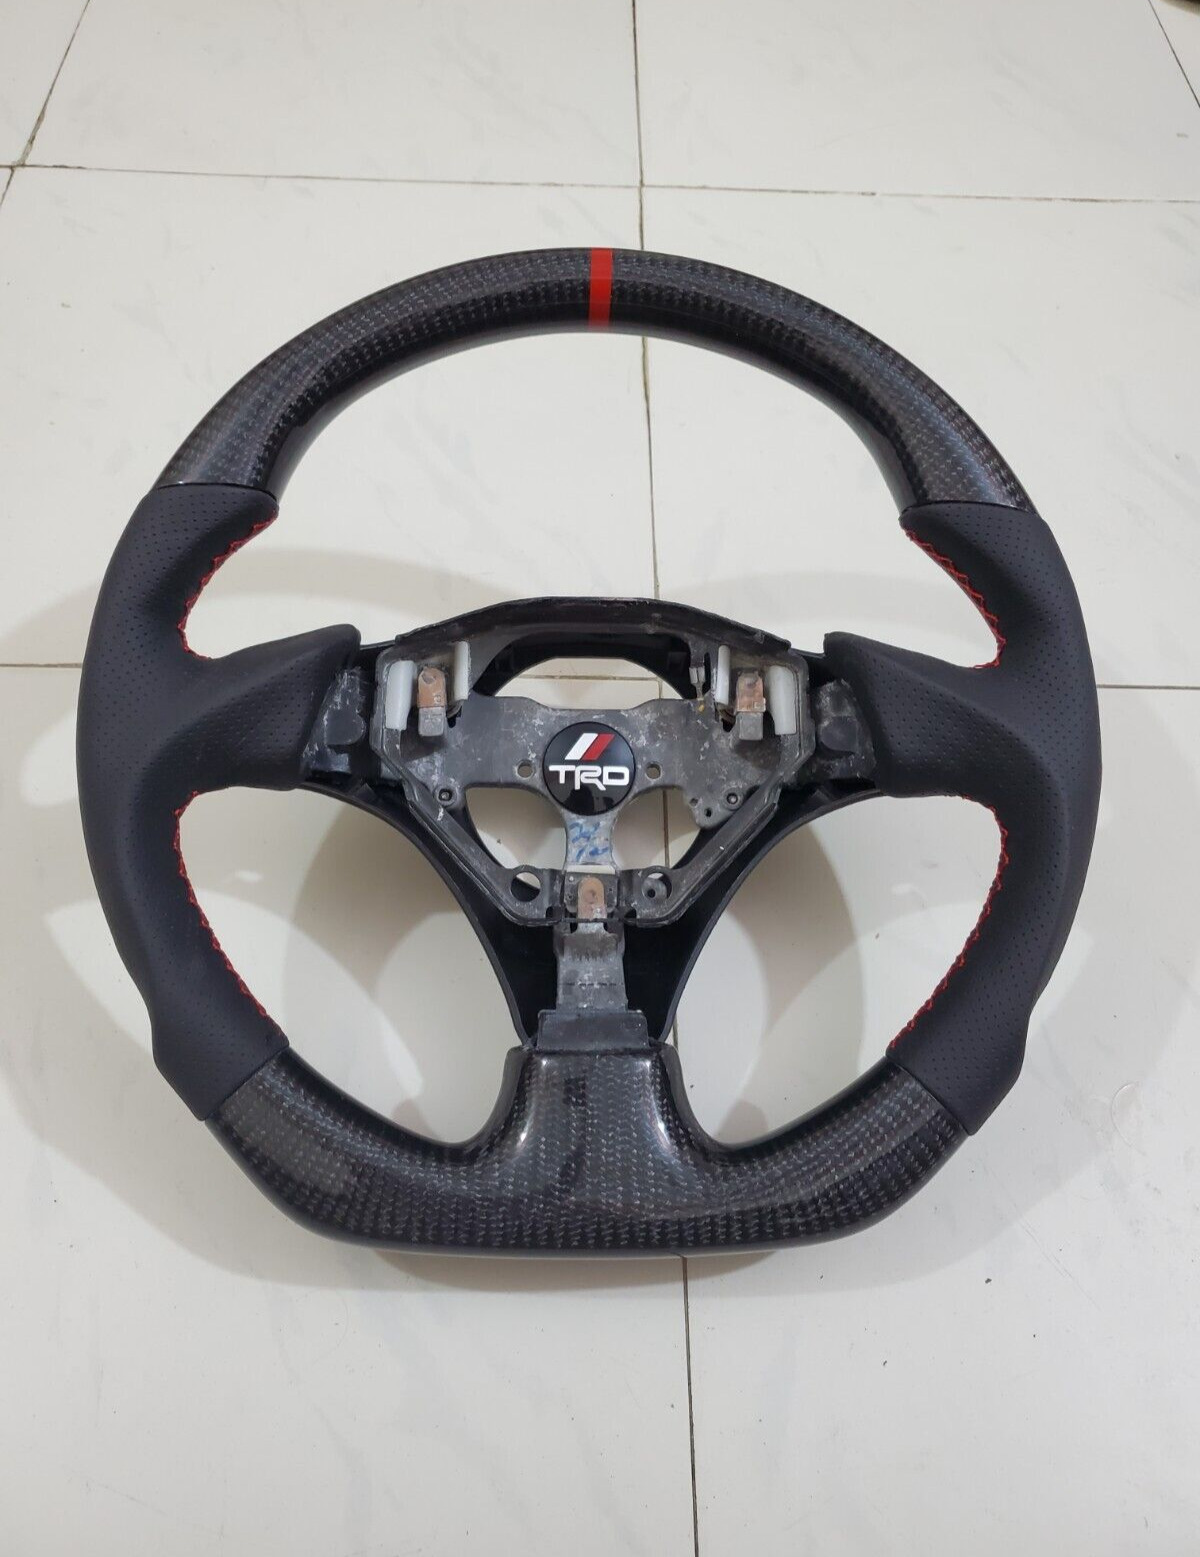 Toyota TRD Real Carbon Steering Wheel for JZA80 MK4 CELICA MR2 MR-S Alteeza JZX